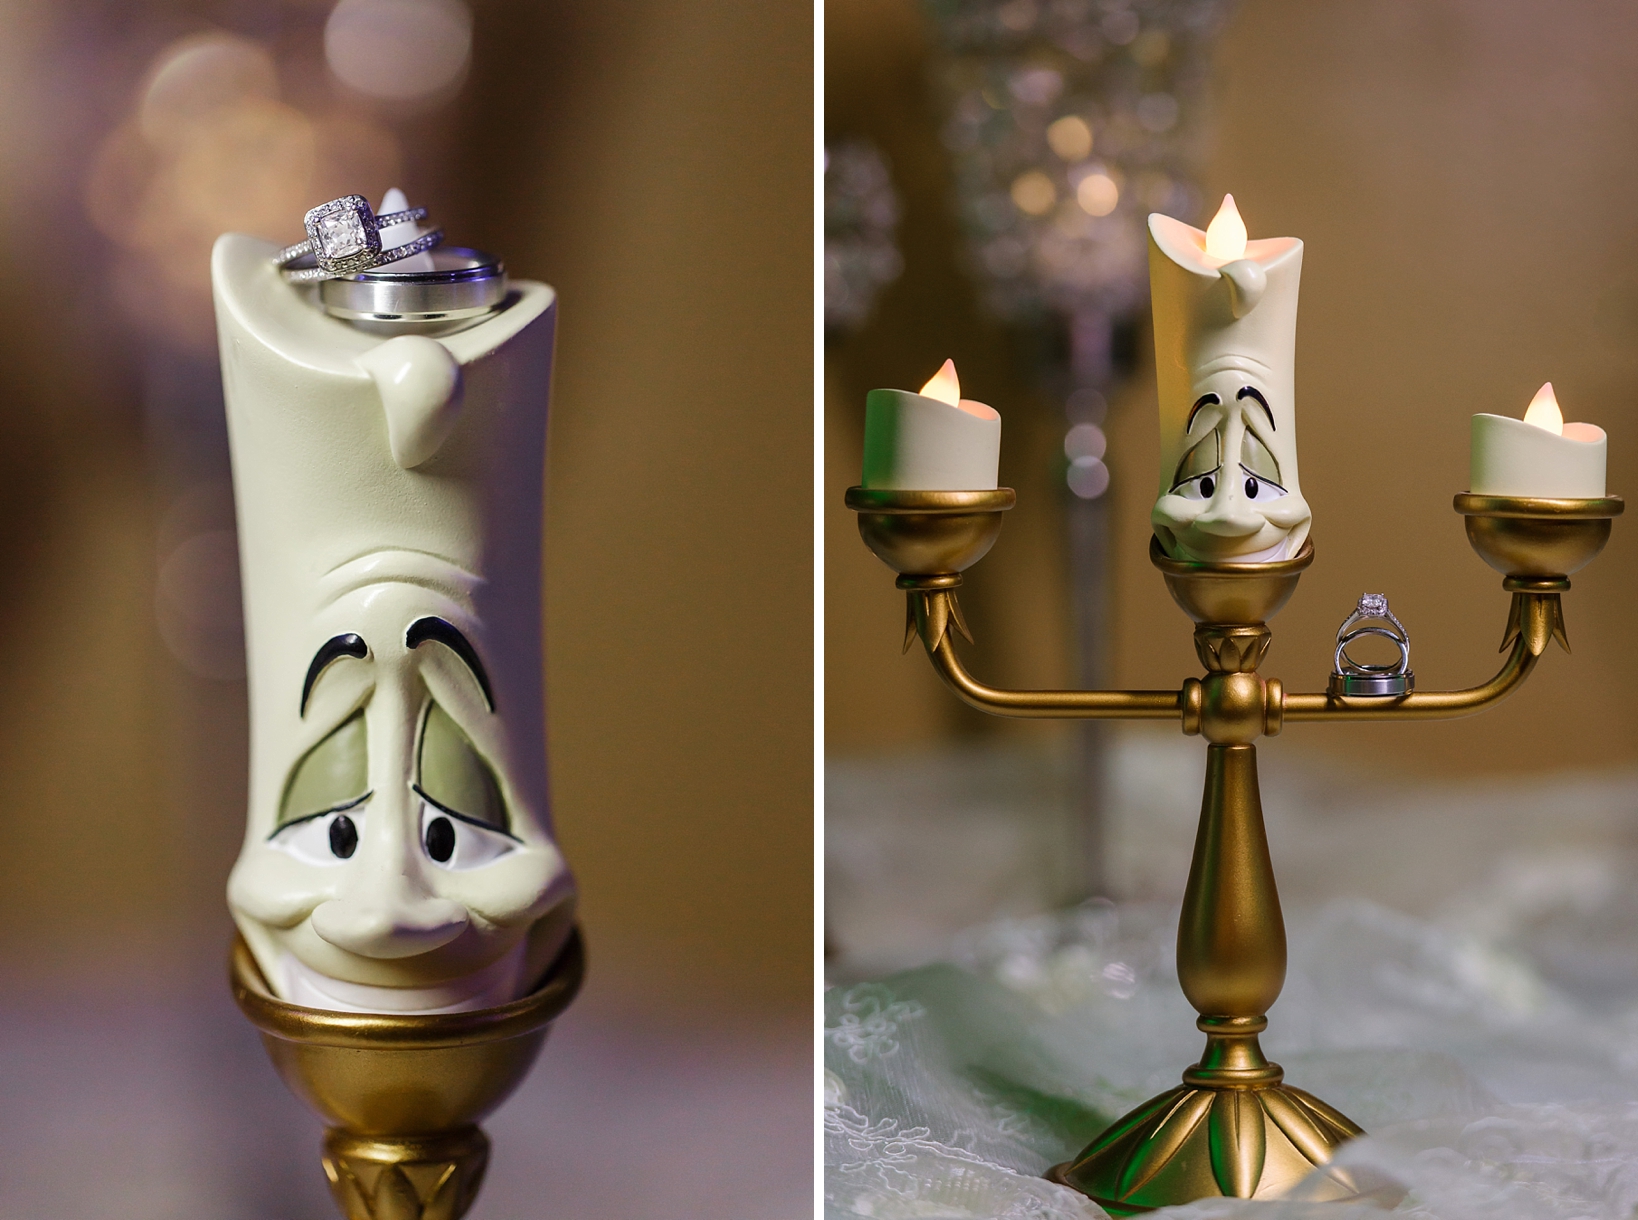 Lumiere figurine from beauty and the beast featured in the details of the wedding rings photographs by Sarah & Ben Photography